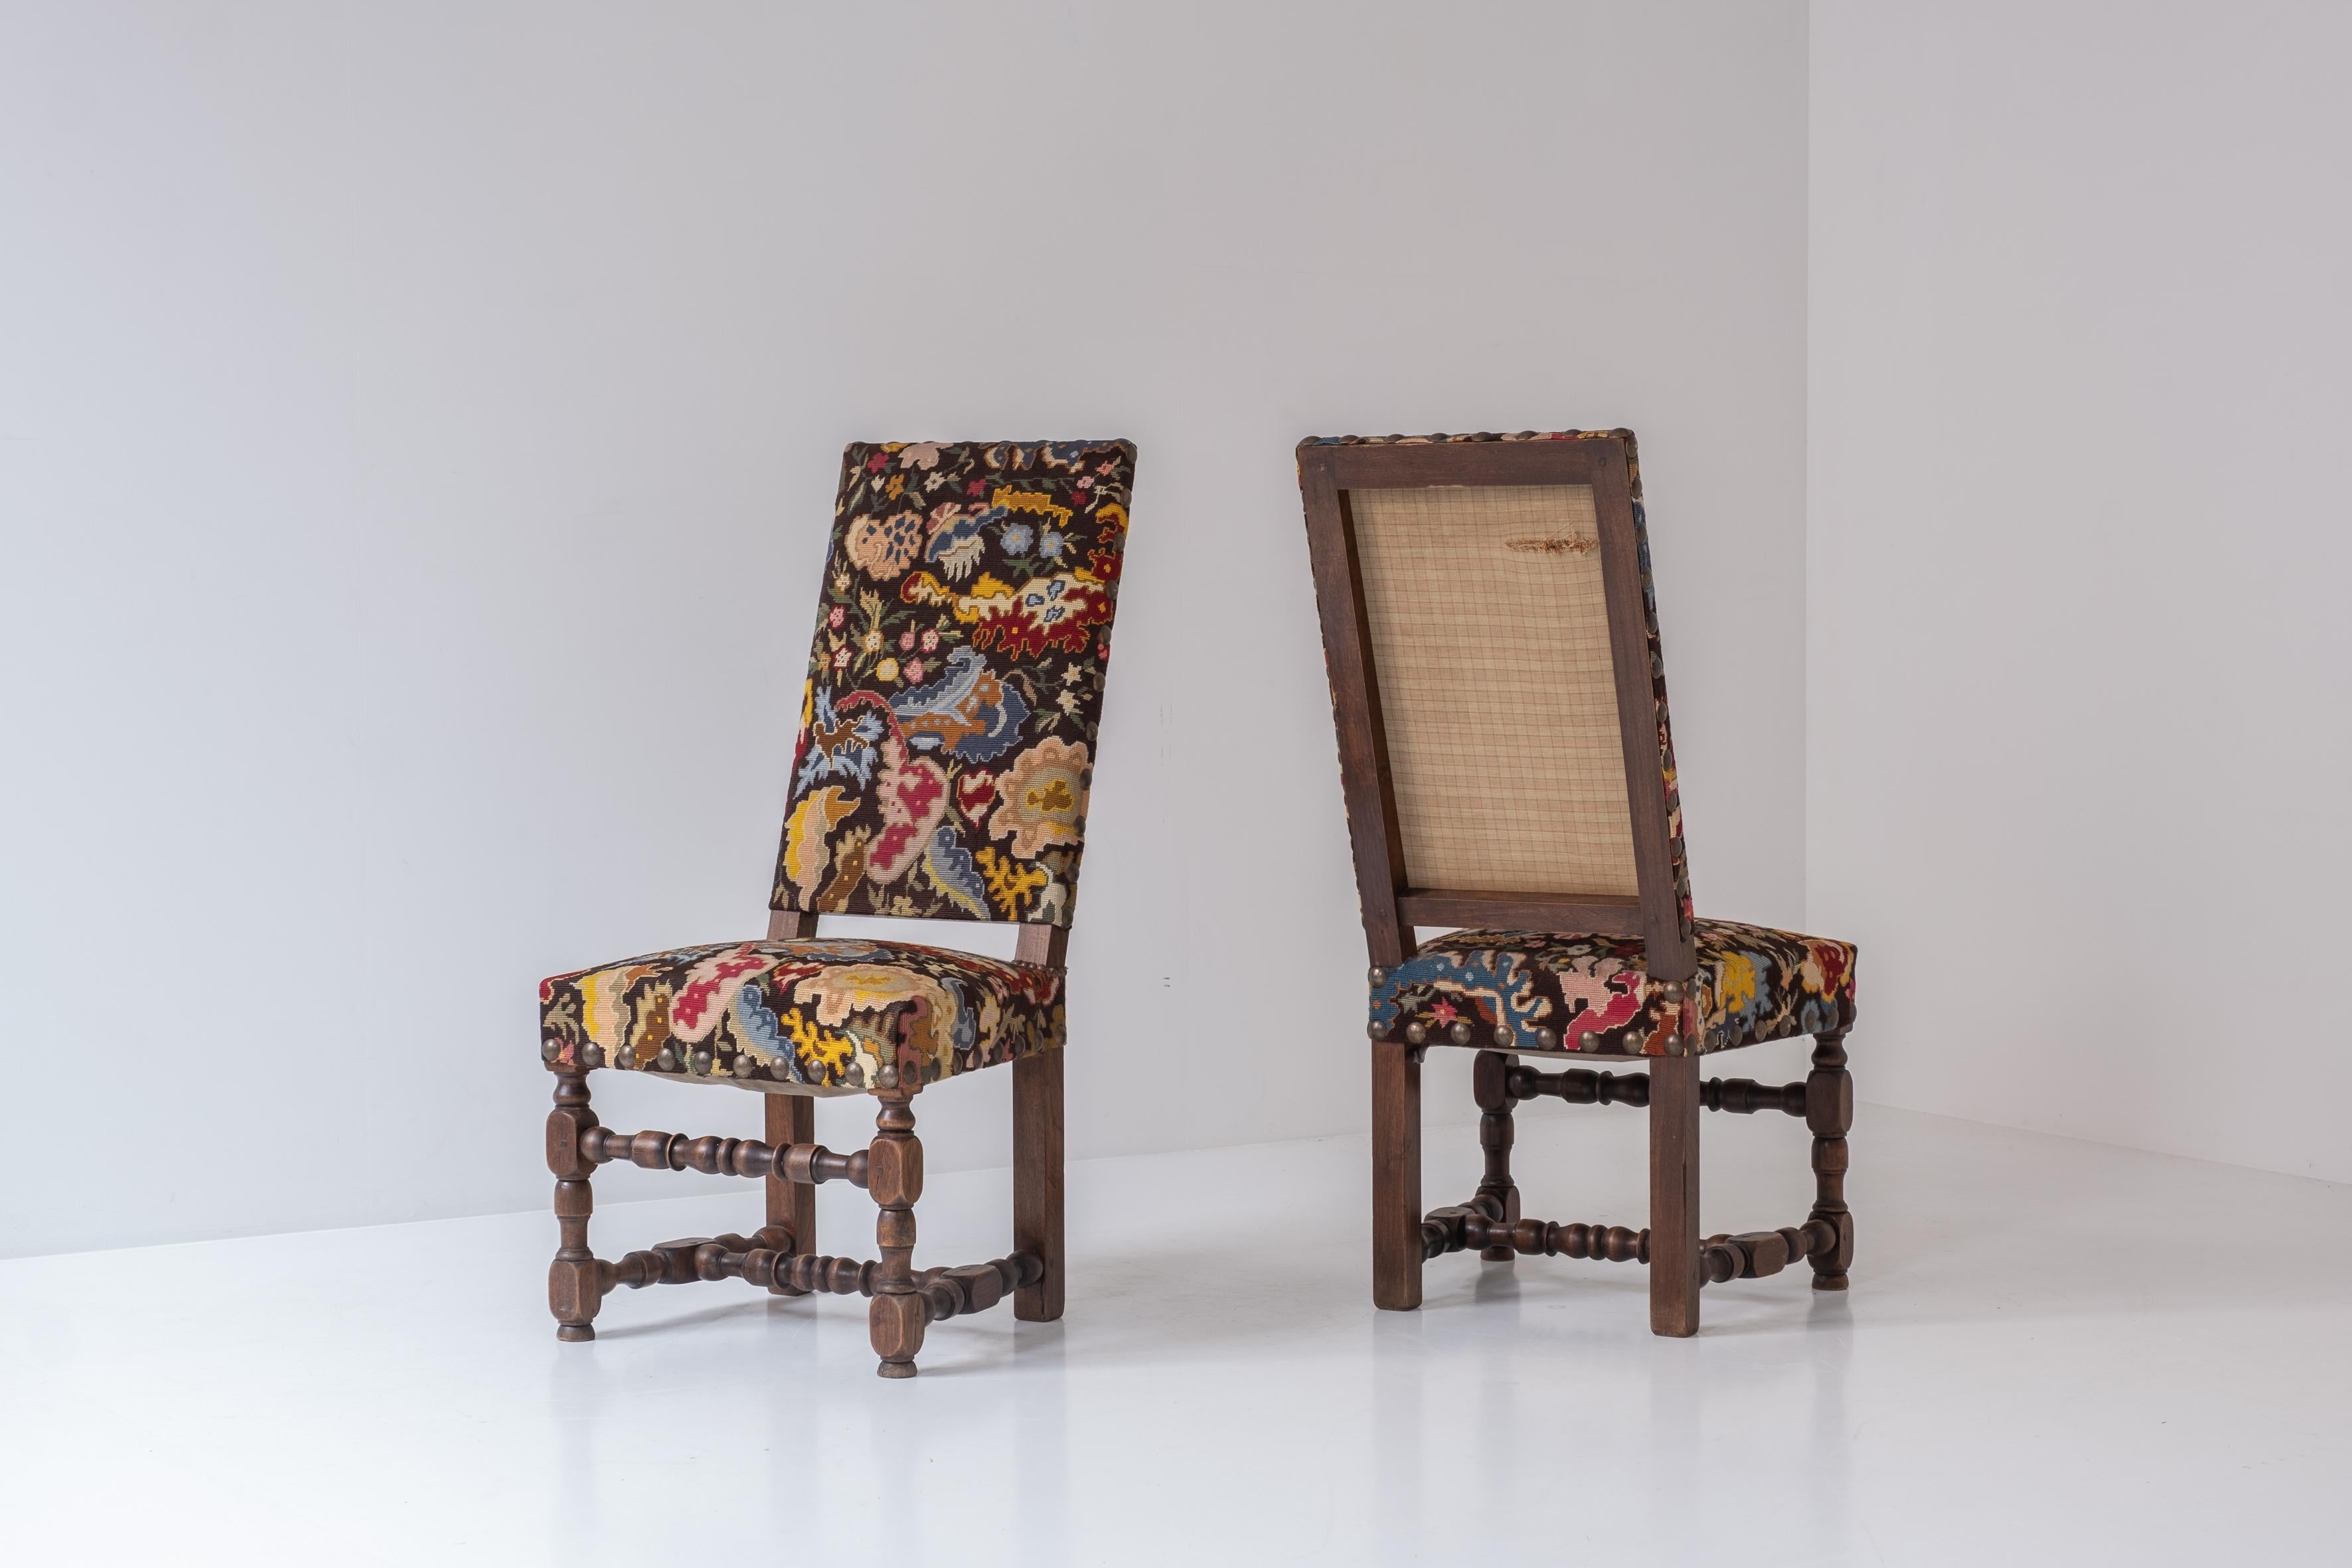 Rare pair baroque side chairs from France, circa 1890. These late 19th century chairs are made out of walnut and upholstered with old colorful tapestry. Elegant twisted frame with nice brass details. Very comfortable and stable seating. Visible